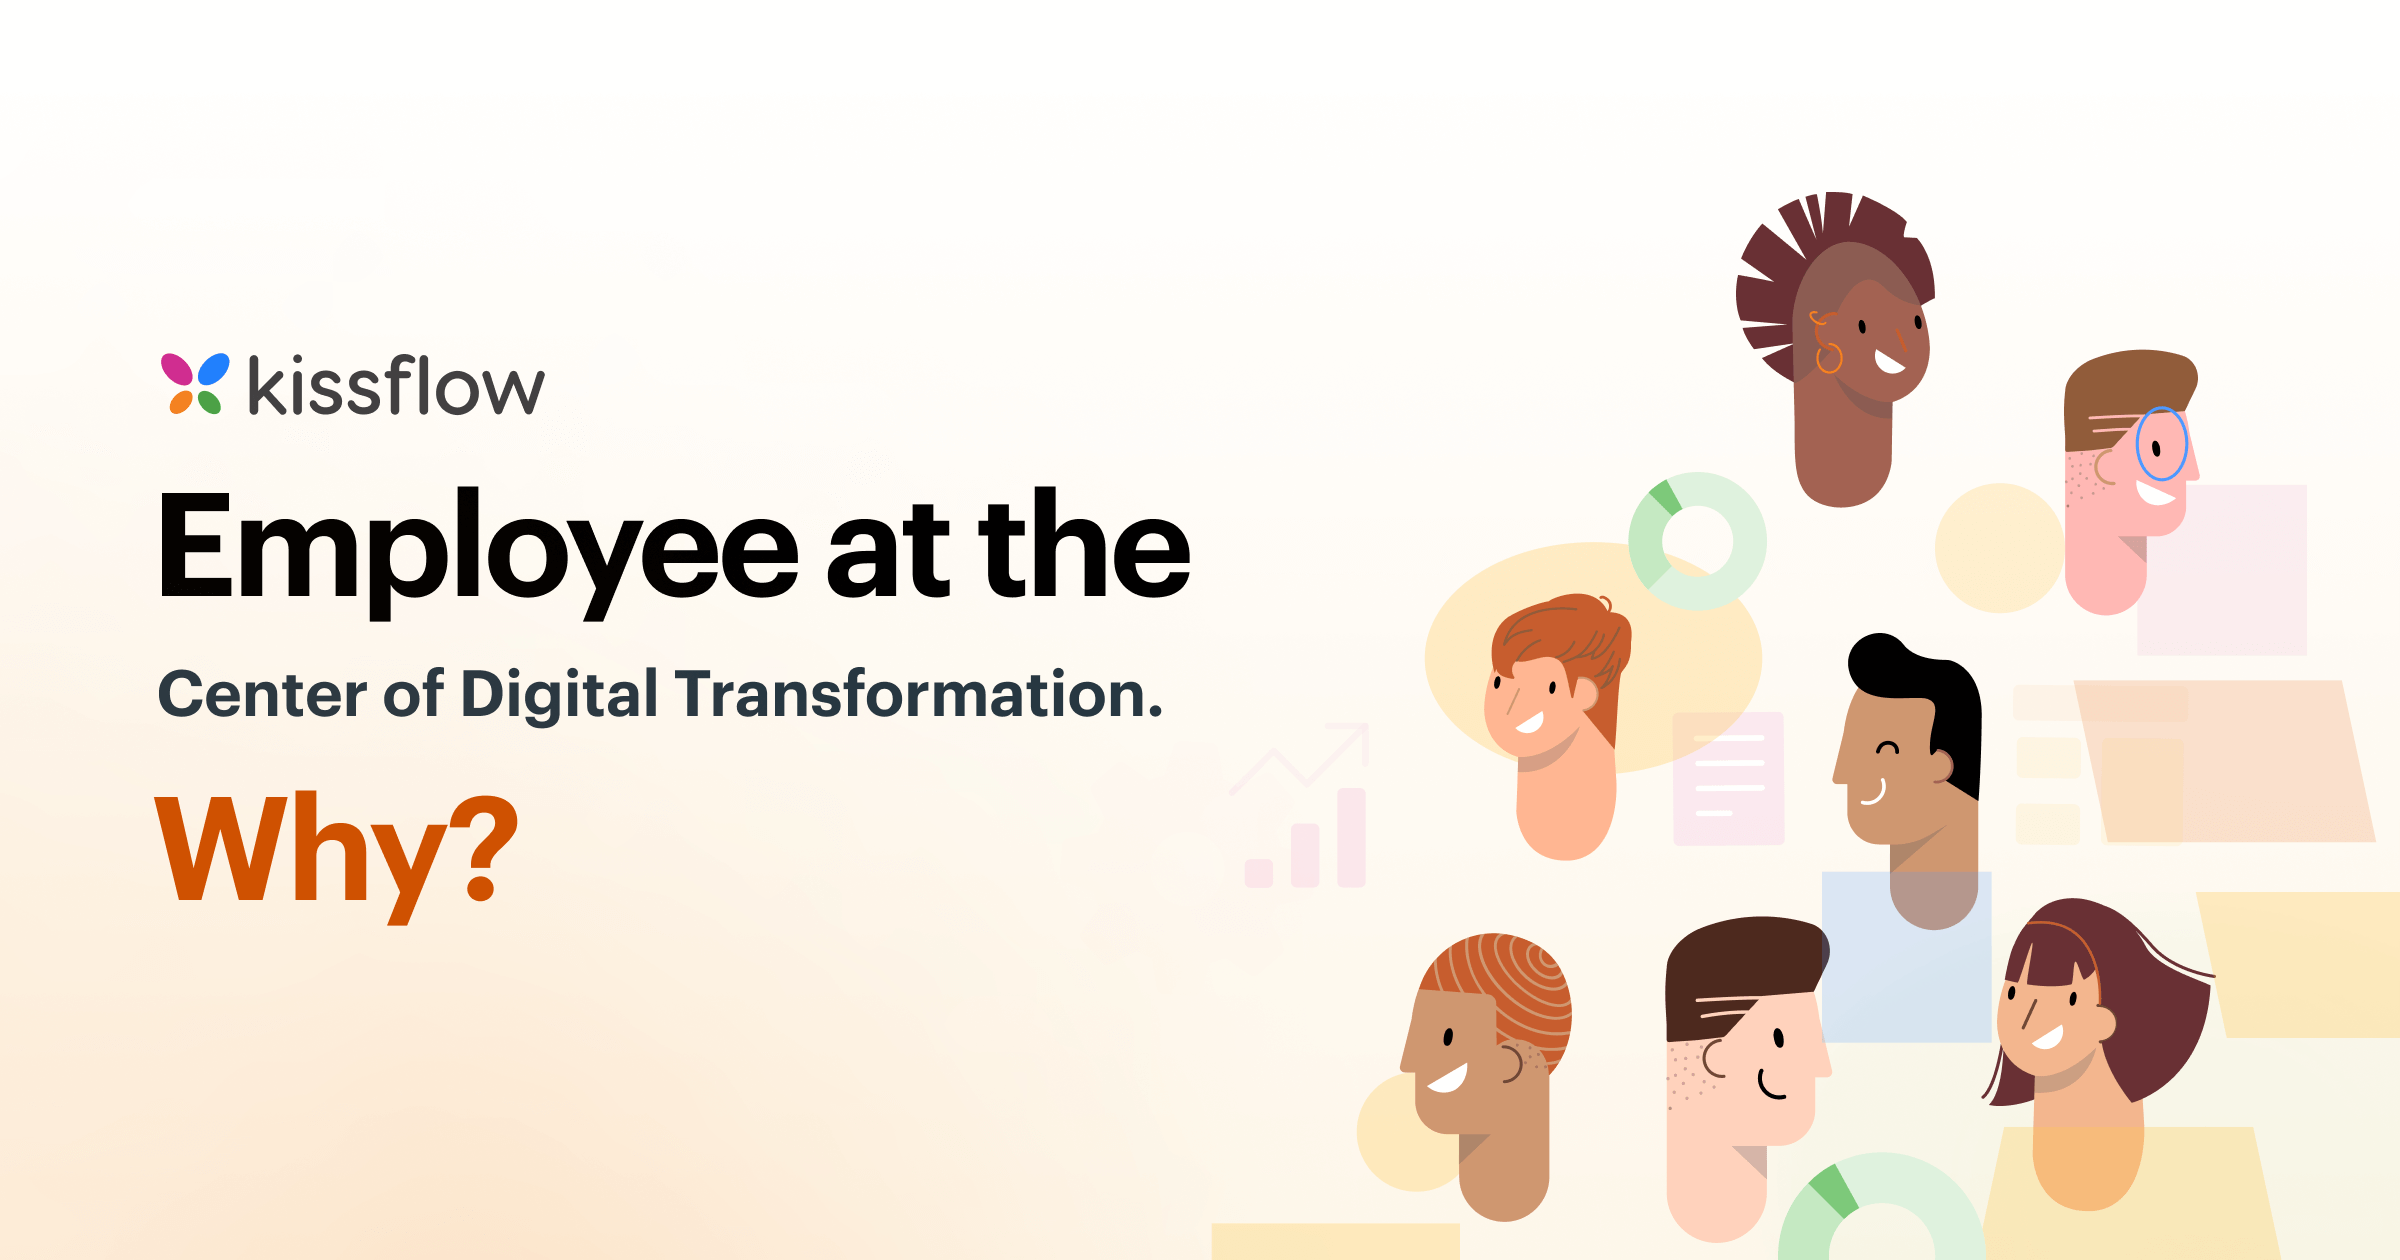 Employees should be at the center of digital transformation